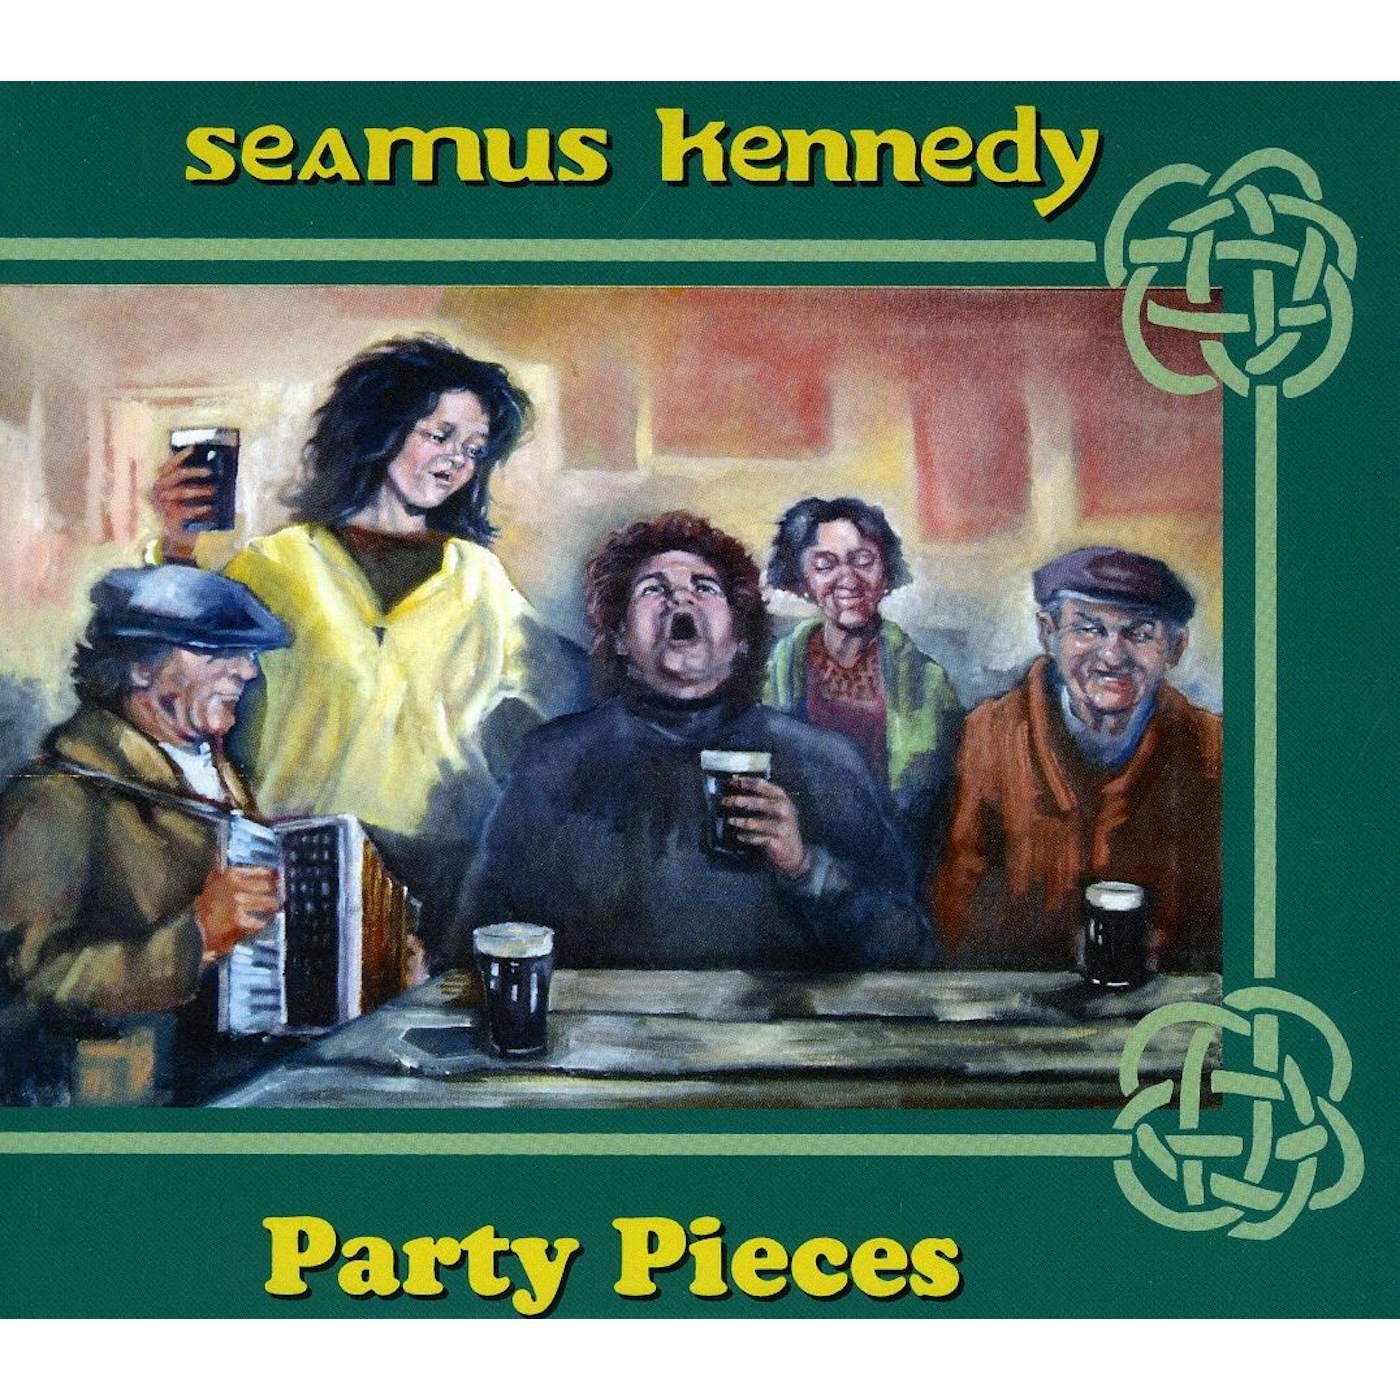 Seamus Kennedy PARTY PIECES CD